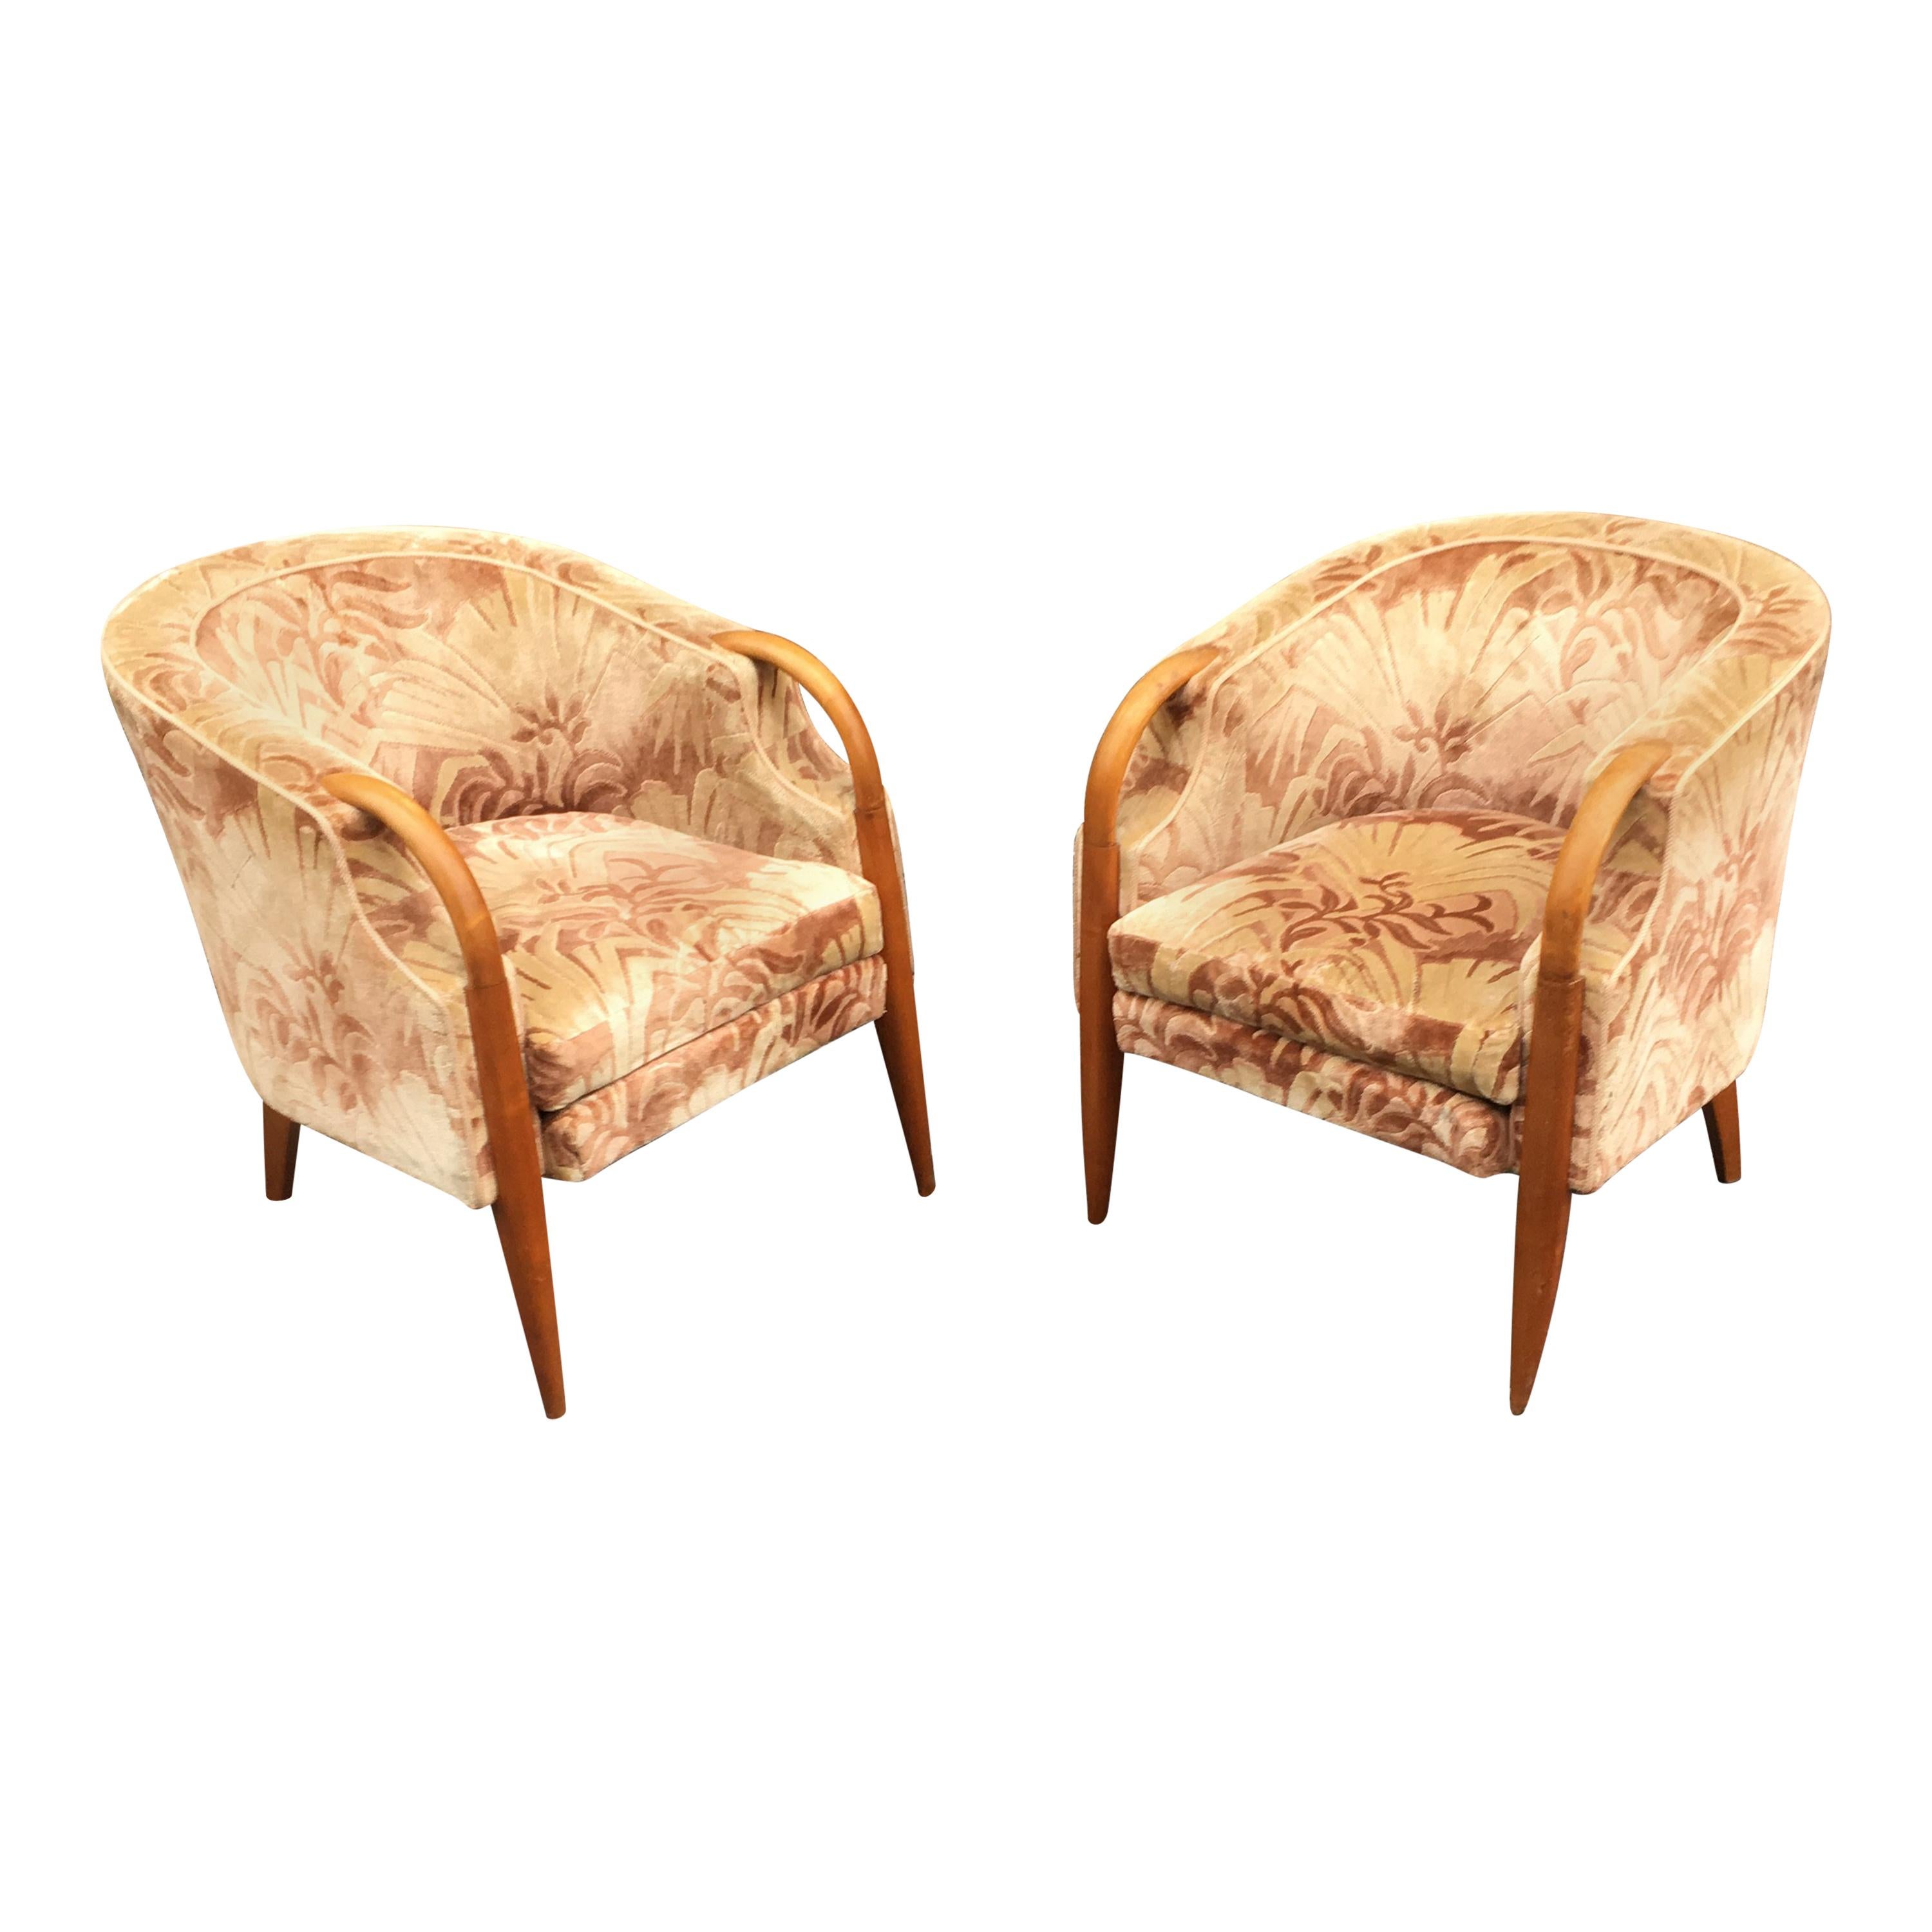 Pair of Art Deco Armchairs in Walnut and Velvet, circa 1930 For Sale